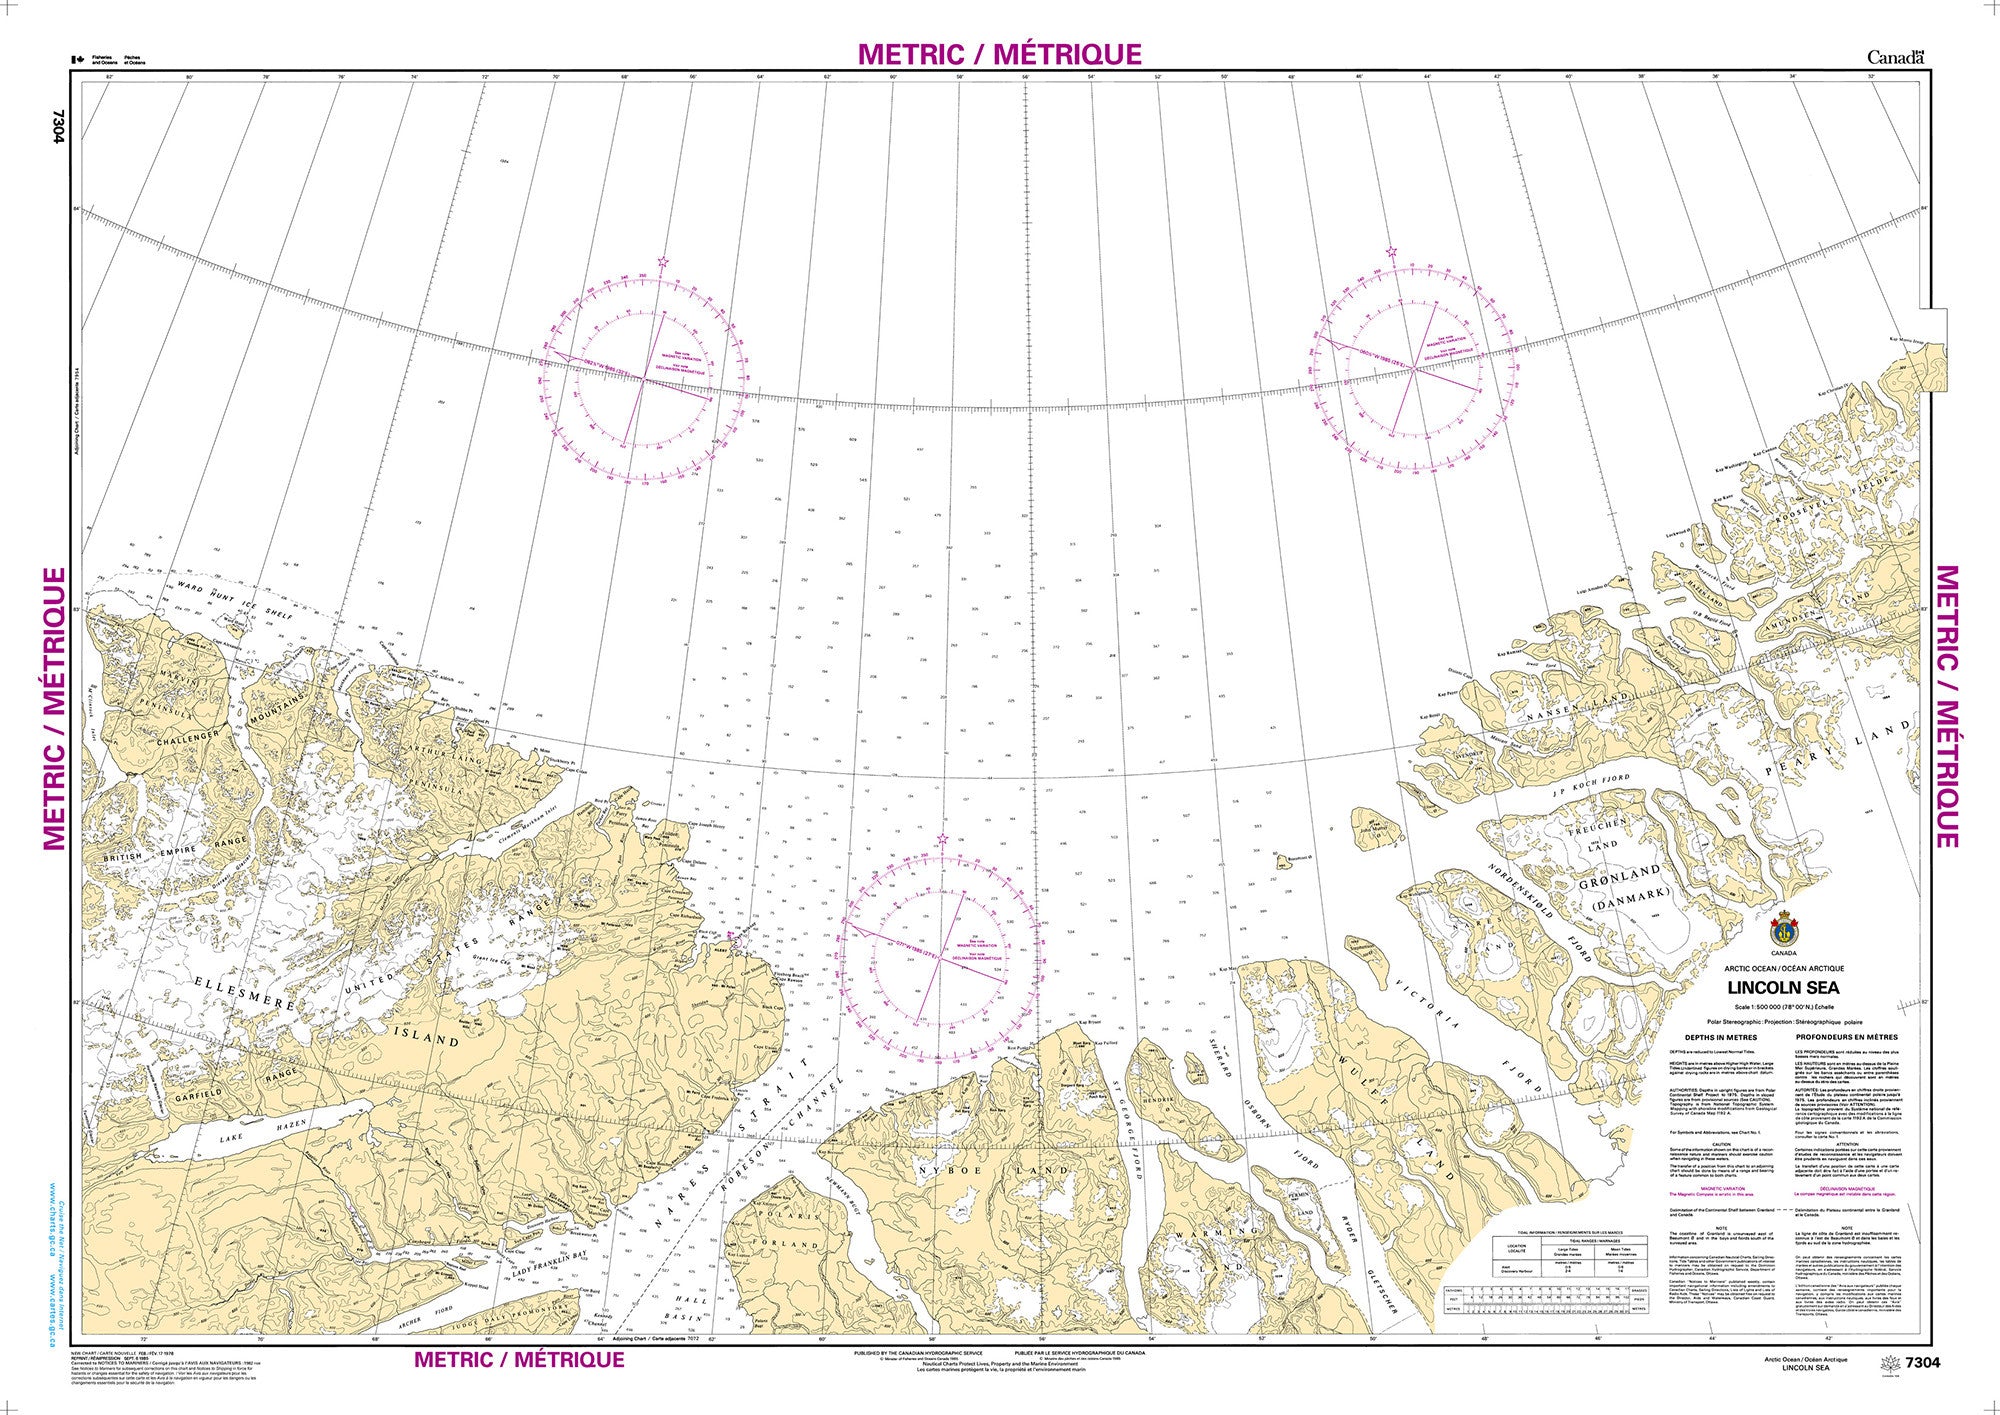 Canadian Hydrographic Service Nautical Chart CHS7304: Lincoln Sea